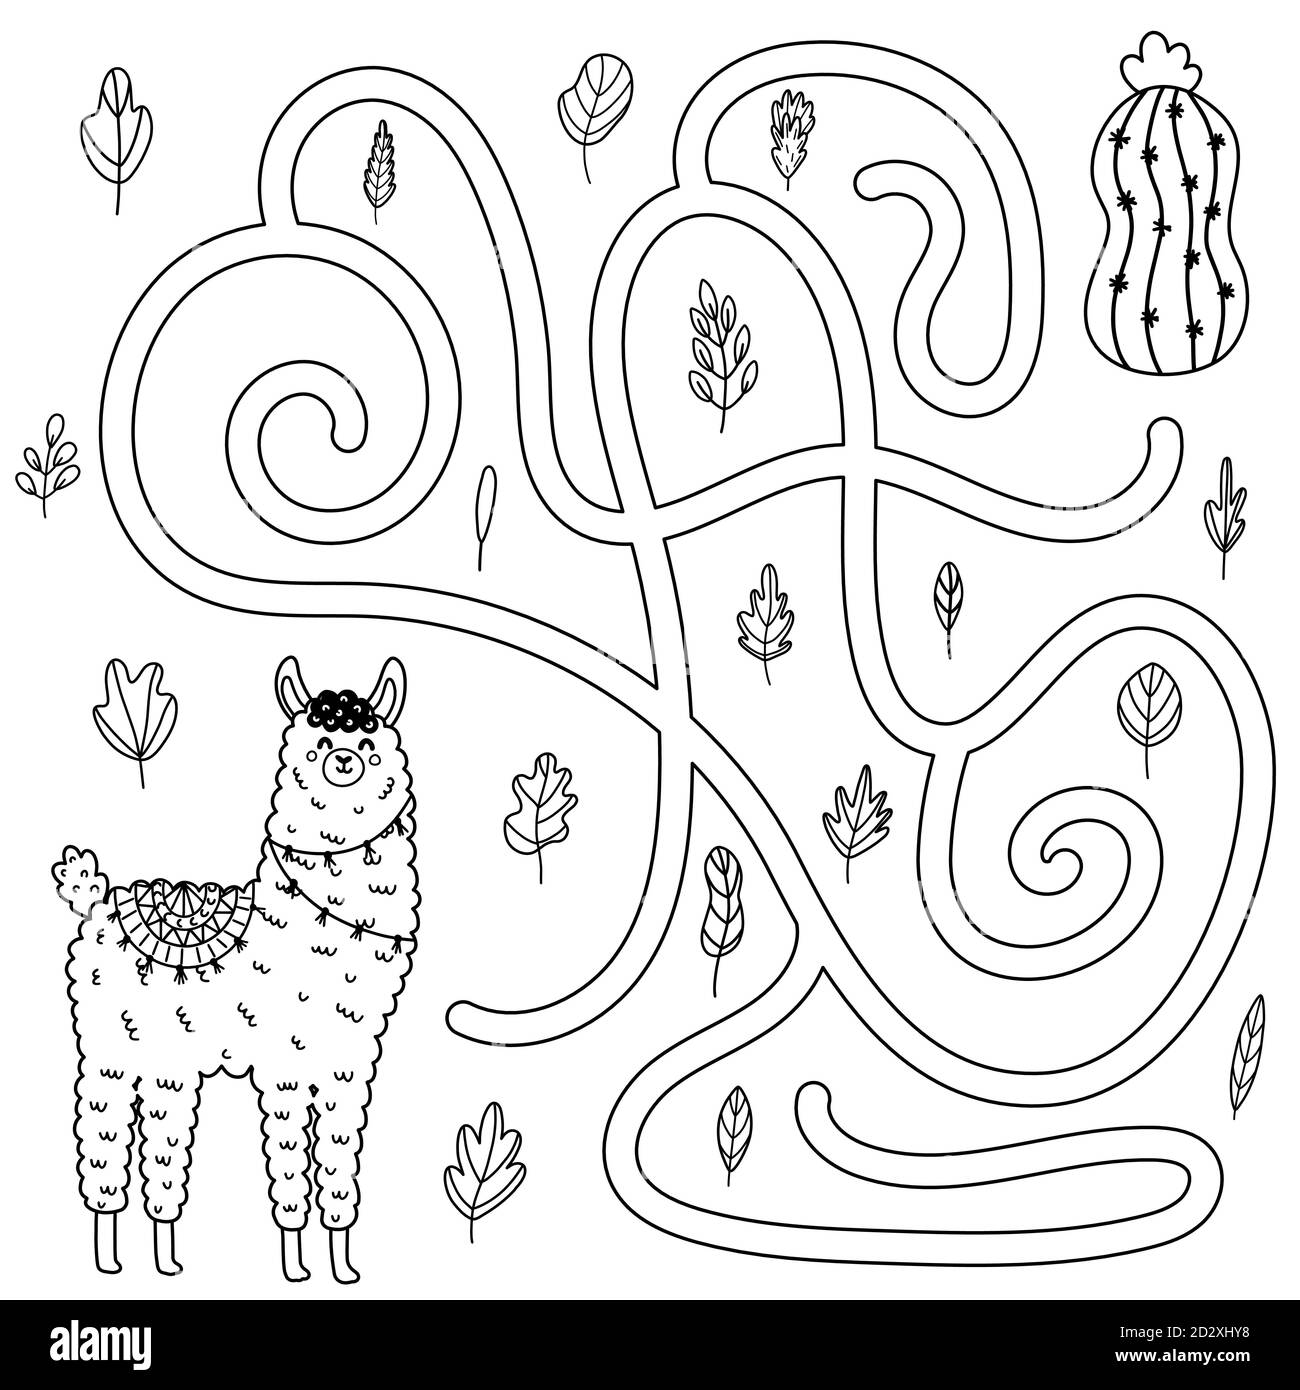 Help the cute llama to get to the cactus. Black and white maze game for kids Stock Vector